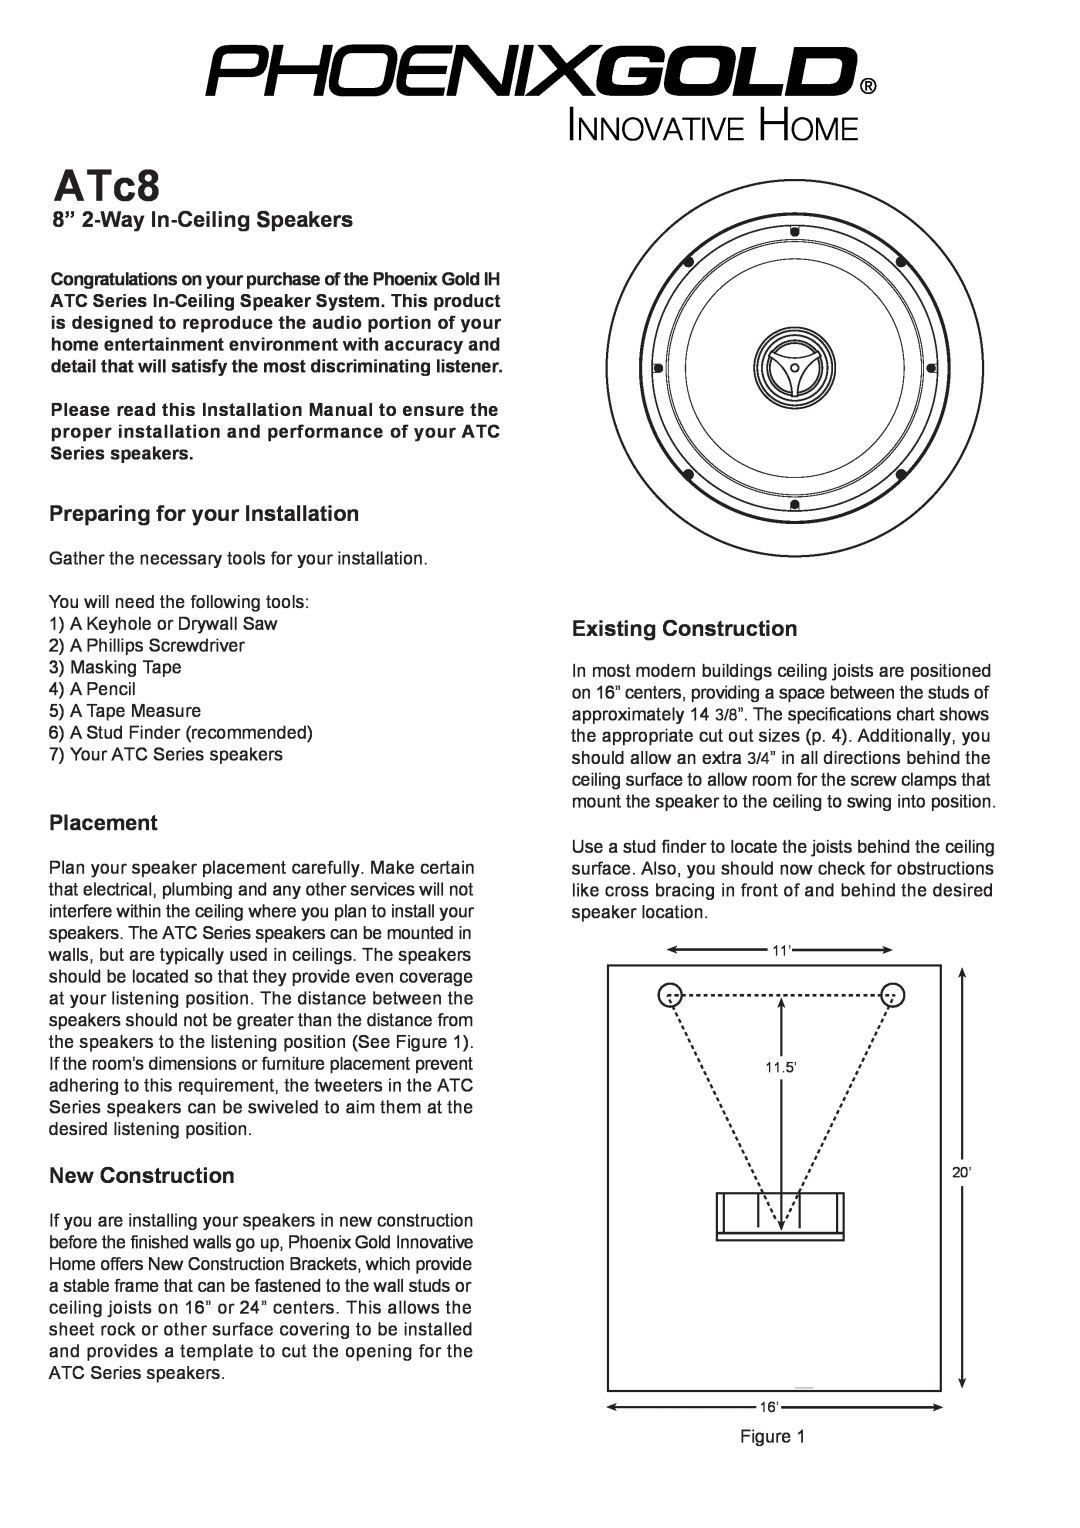 Phoenix Gold ATc8 installation manual 8” 2-Way In-CeilingSpeakers, Preparing for your Installation, Placement 